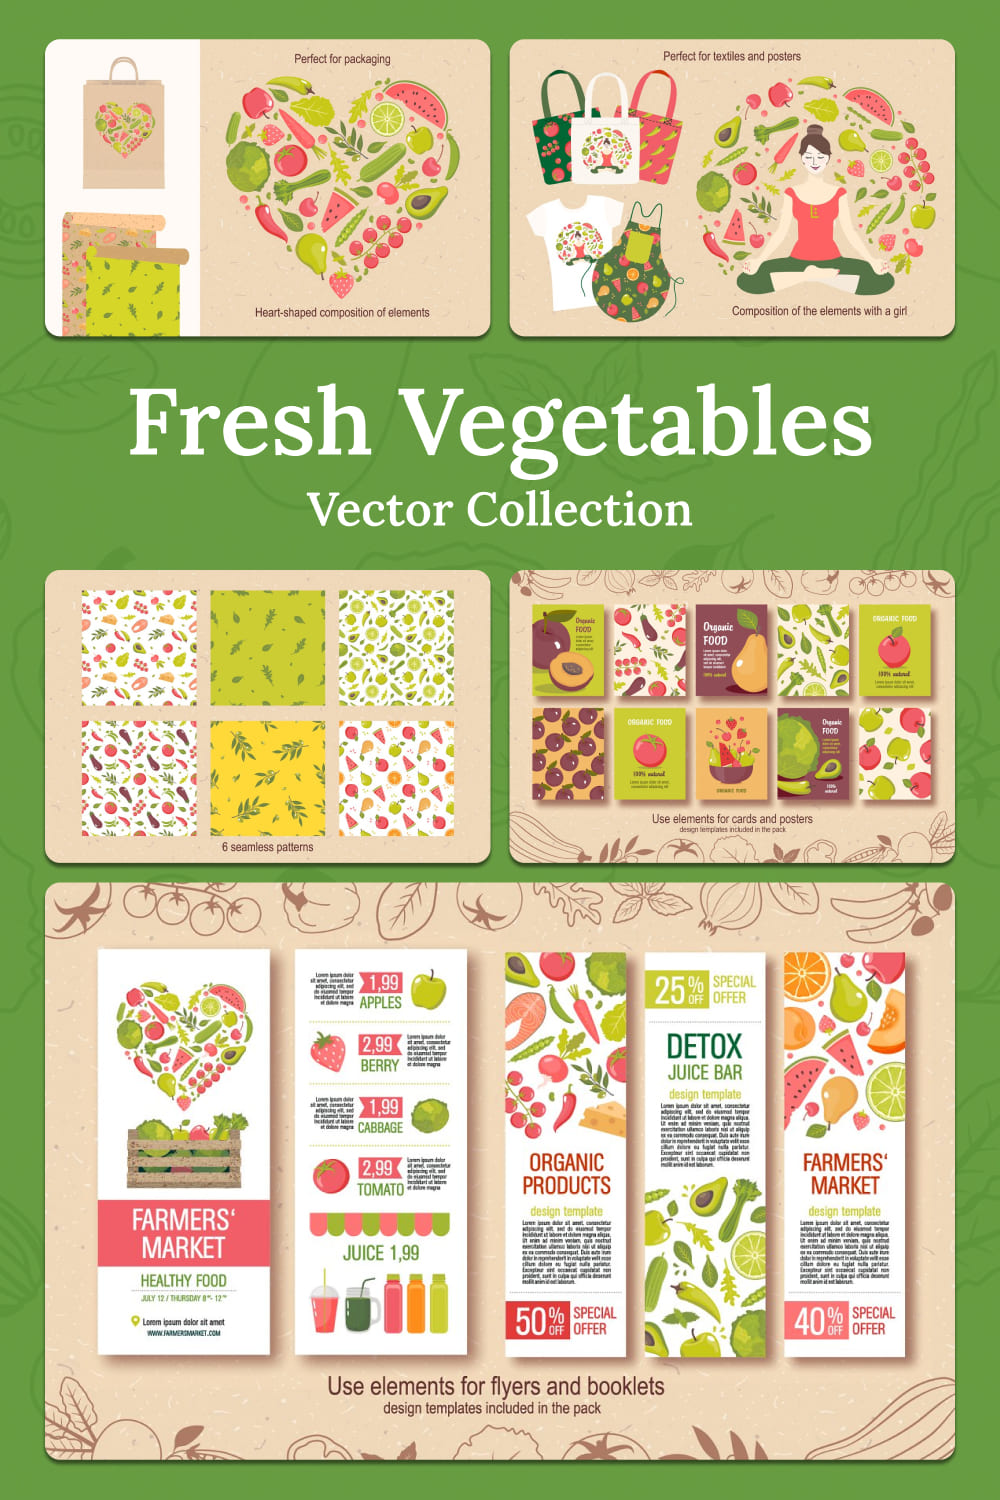 Fresh vegetables vector collection - pinterest image preview.